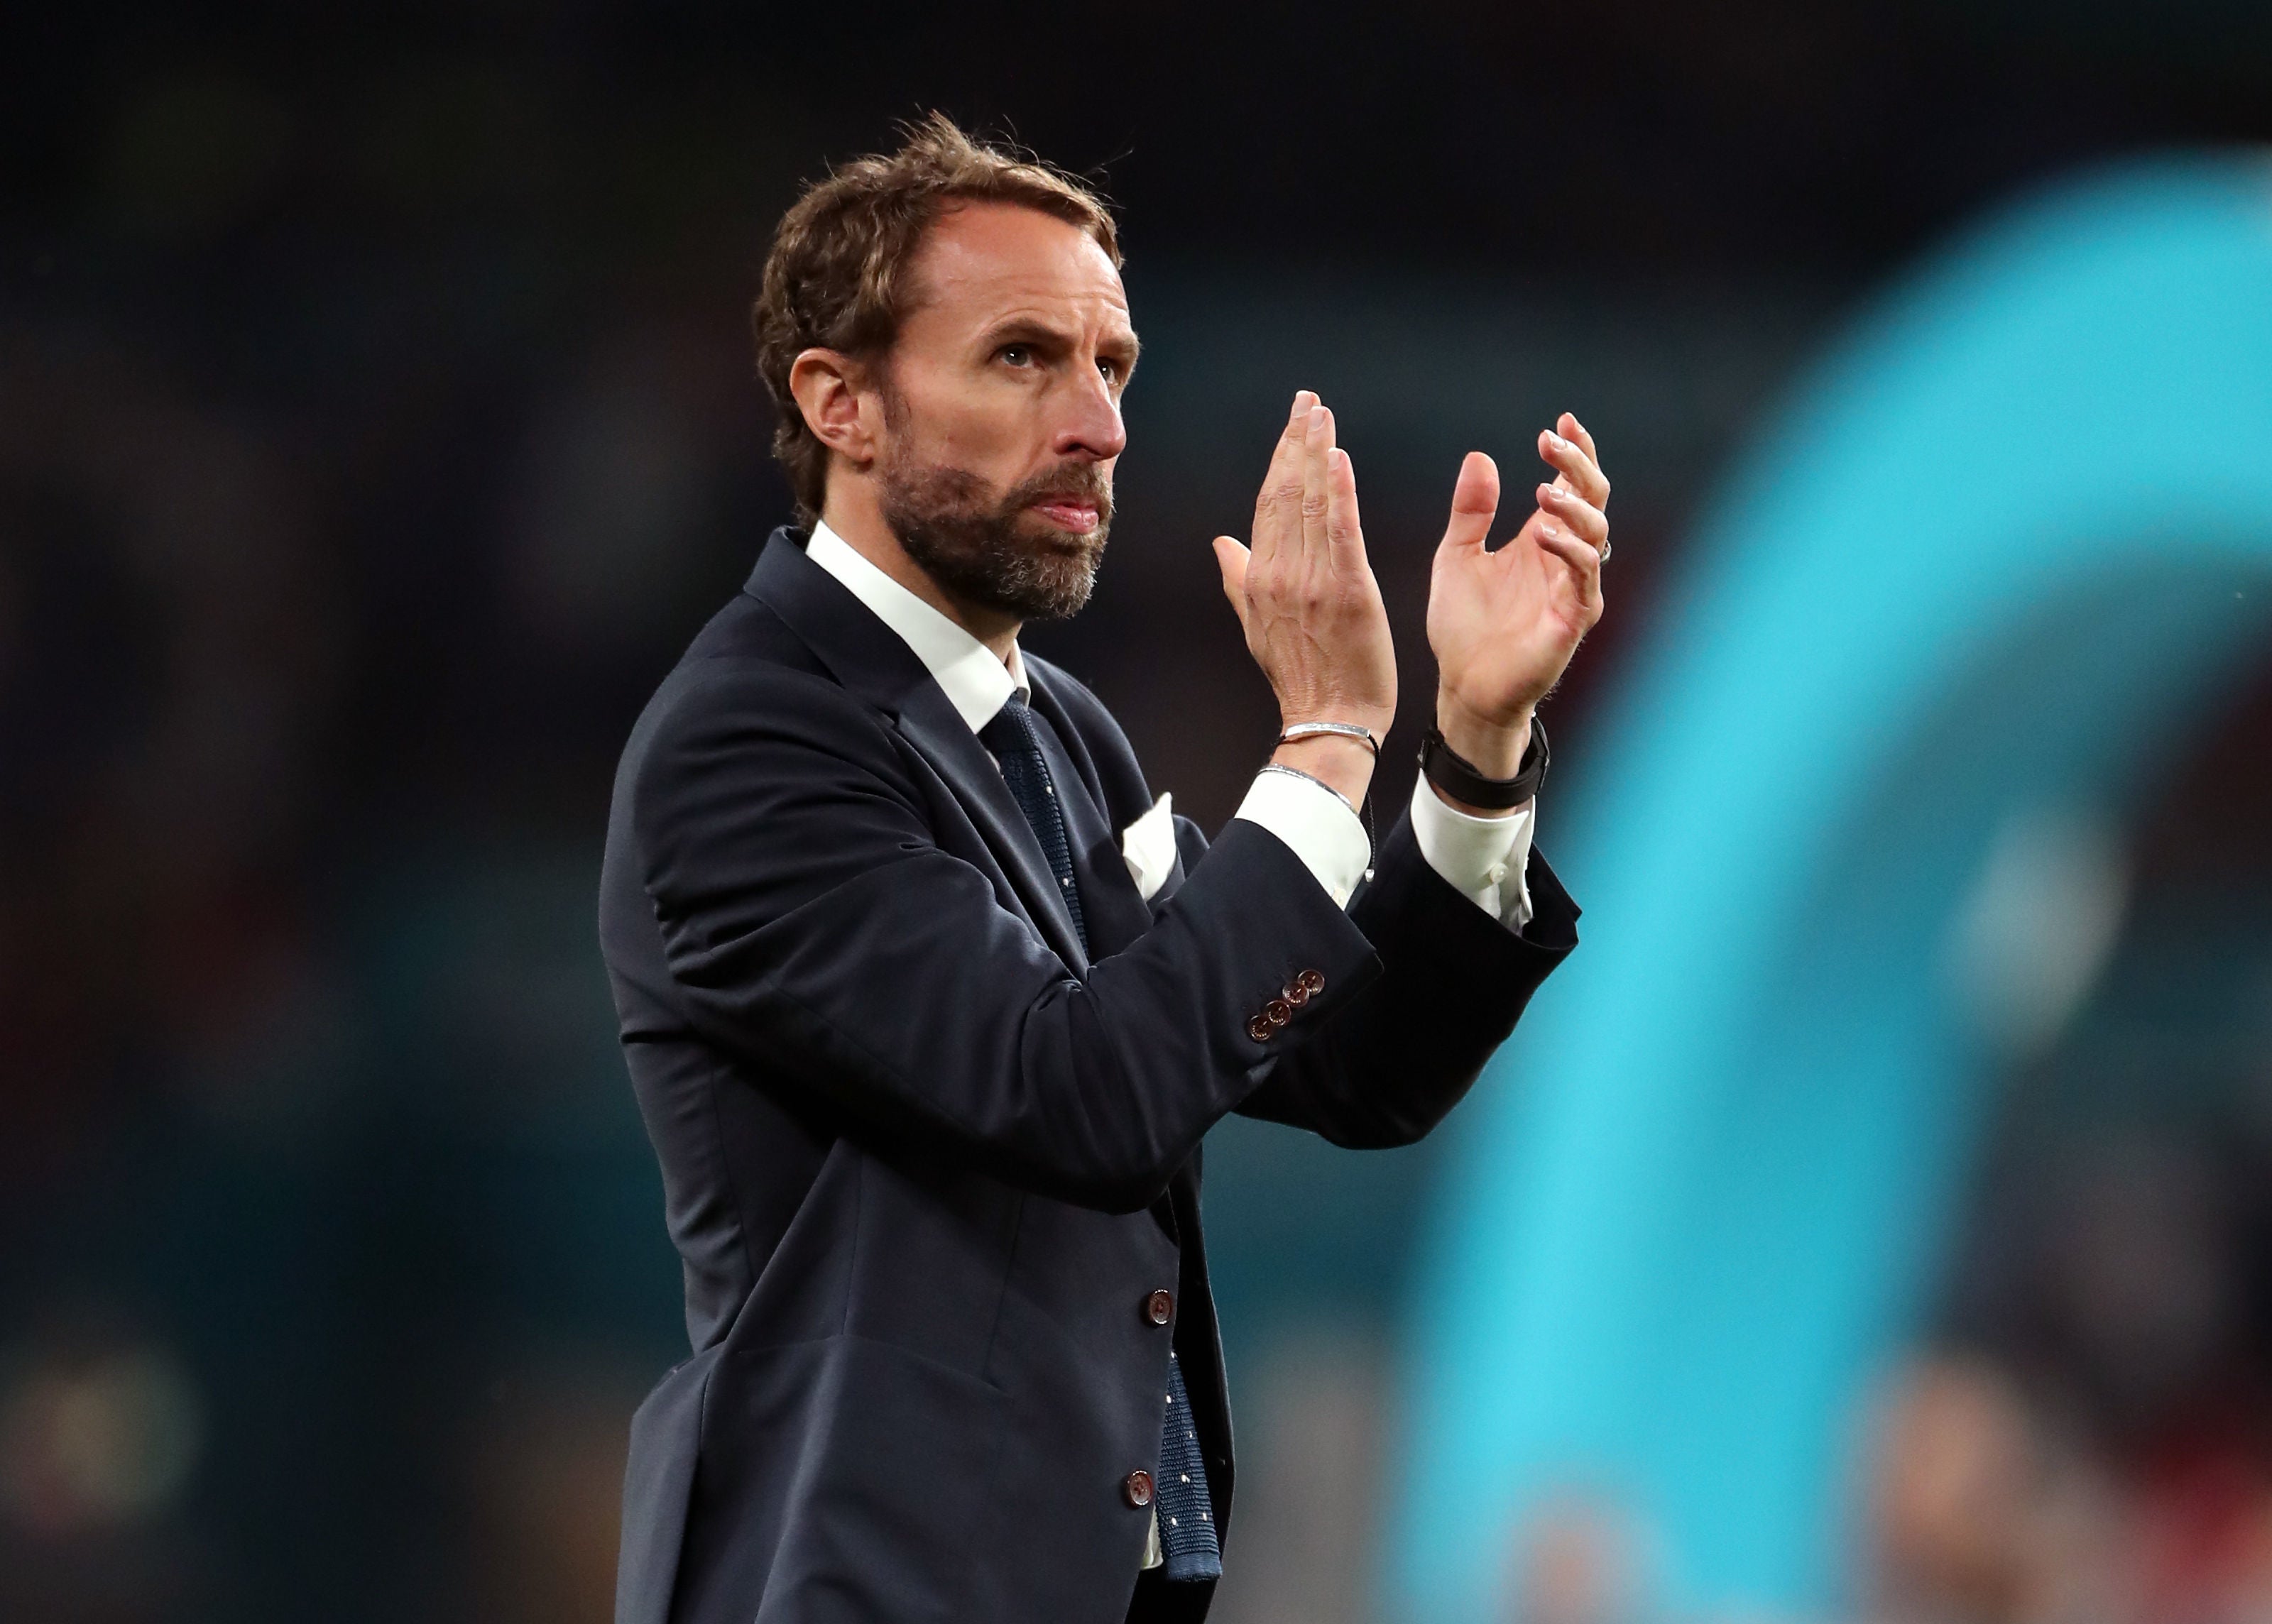 Gareth Southgate was part of a campaign advocating the vaccine